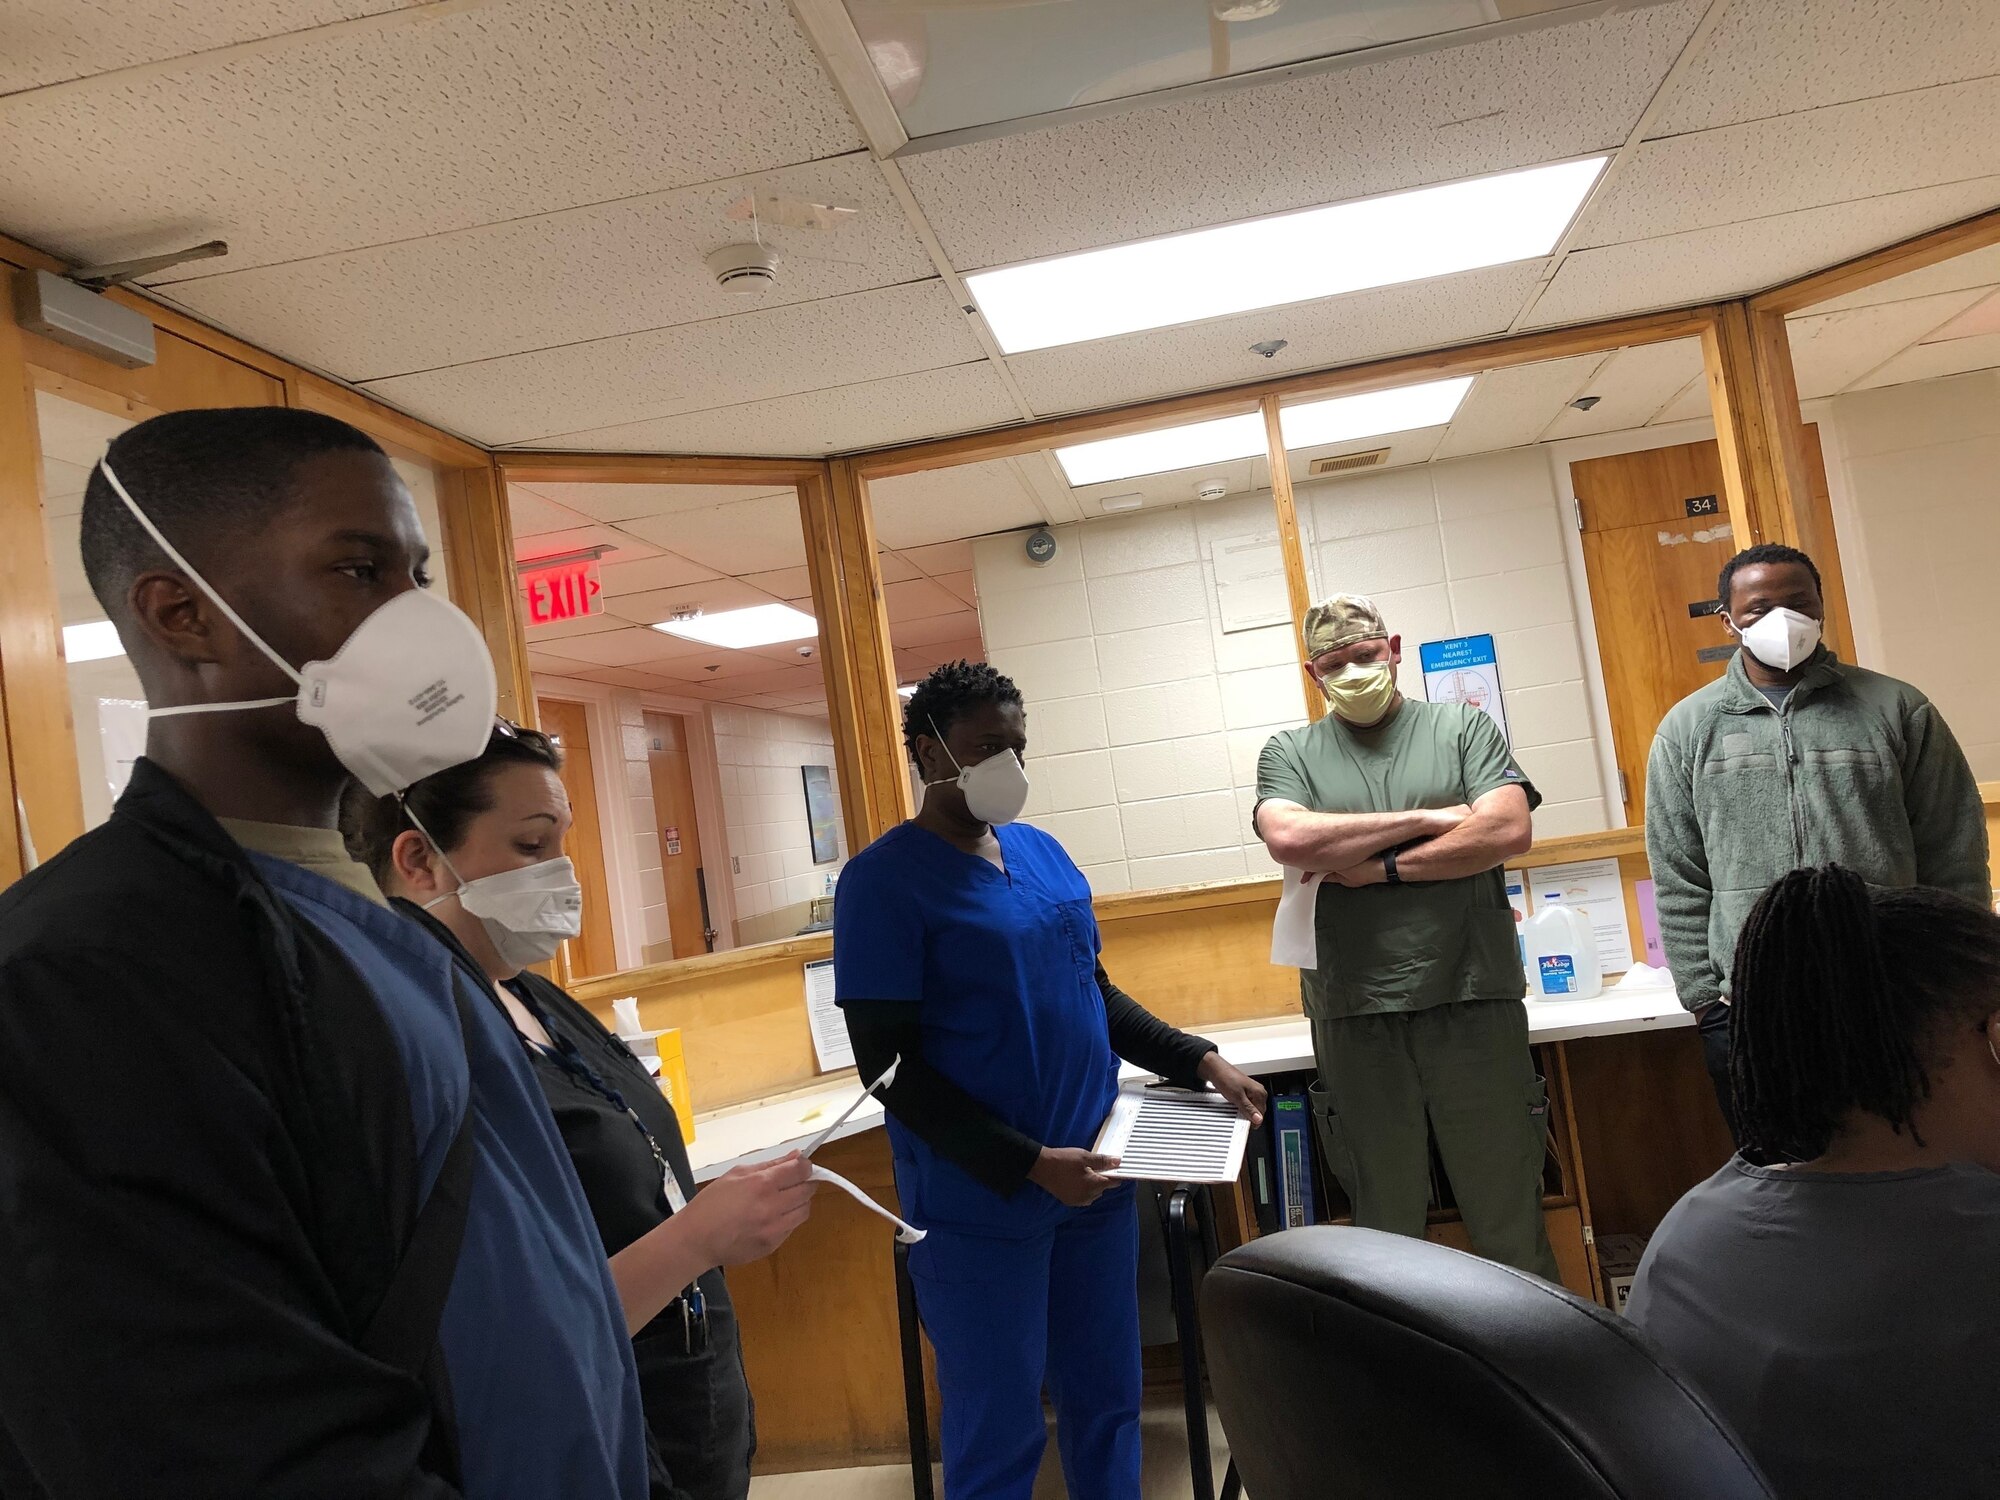 Soldiers and Airmen with the Delaware National Guard wear personal protective equipment at the Delaware Psychiatric Center in New Castle, Delaware, May 4, 2020.